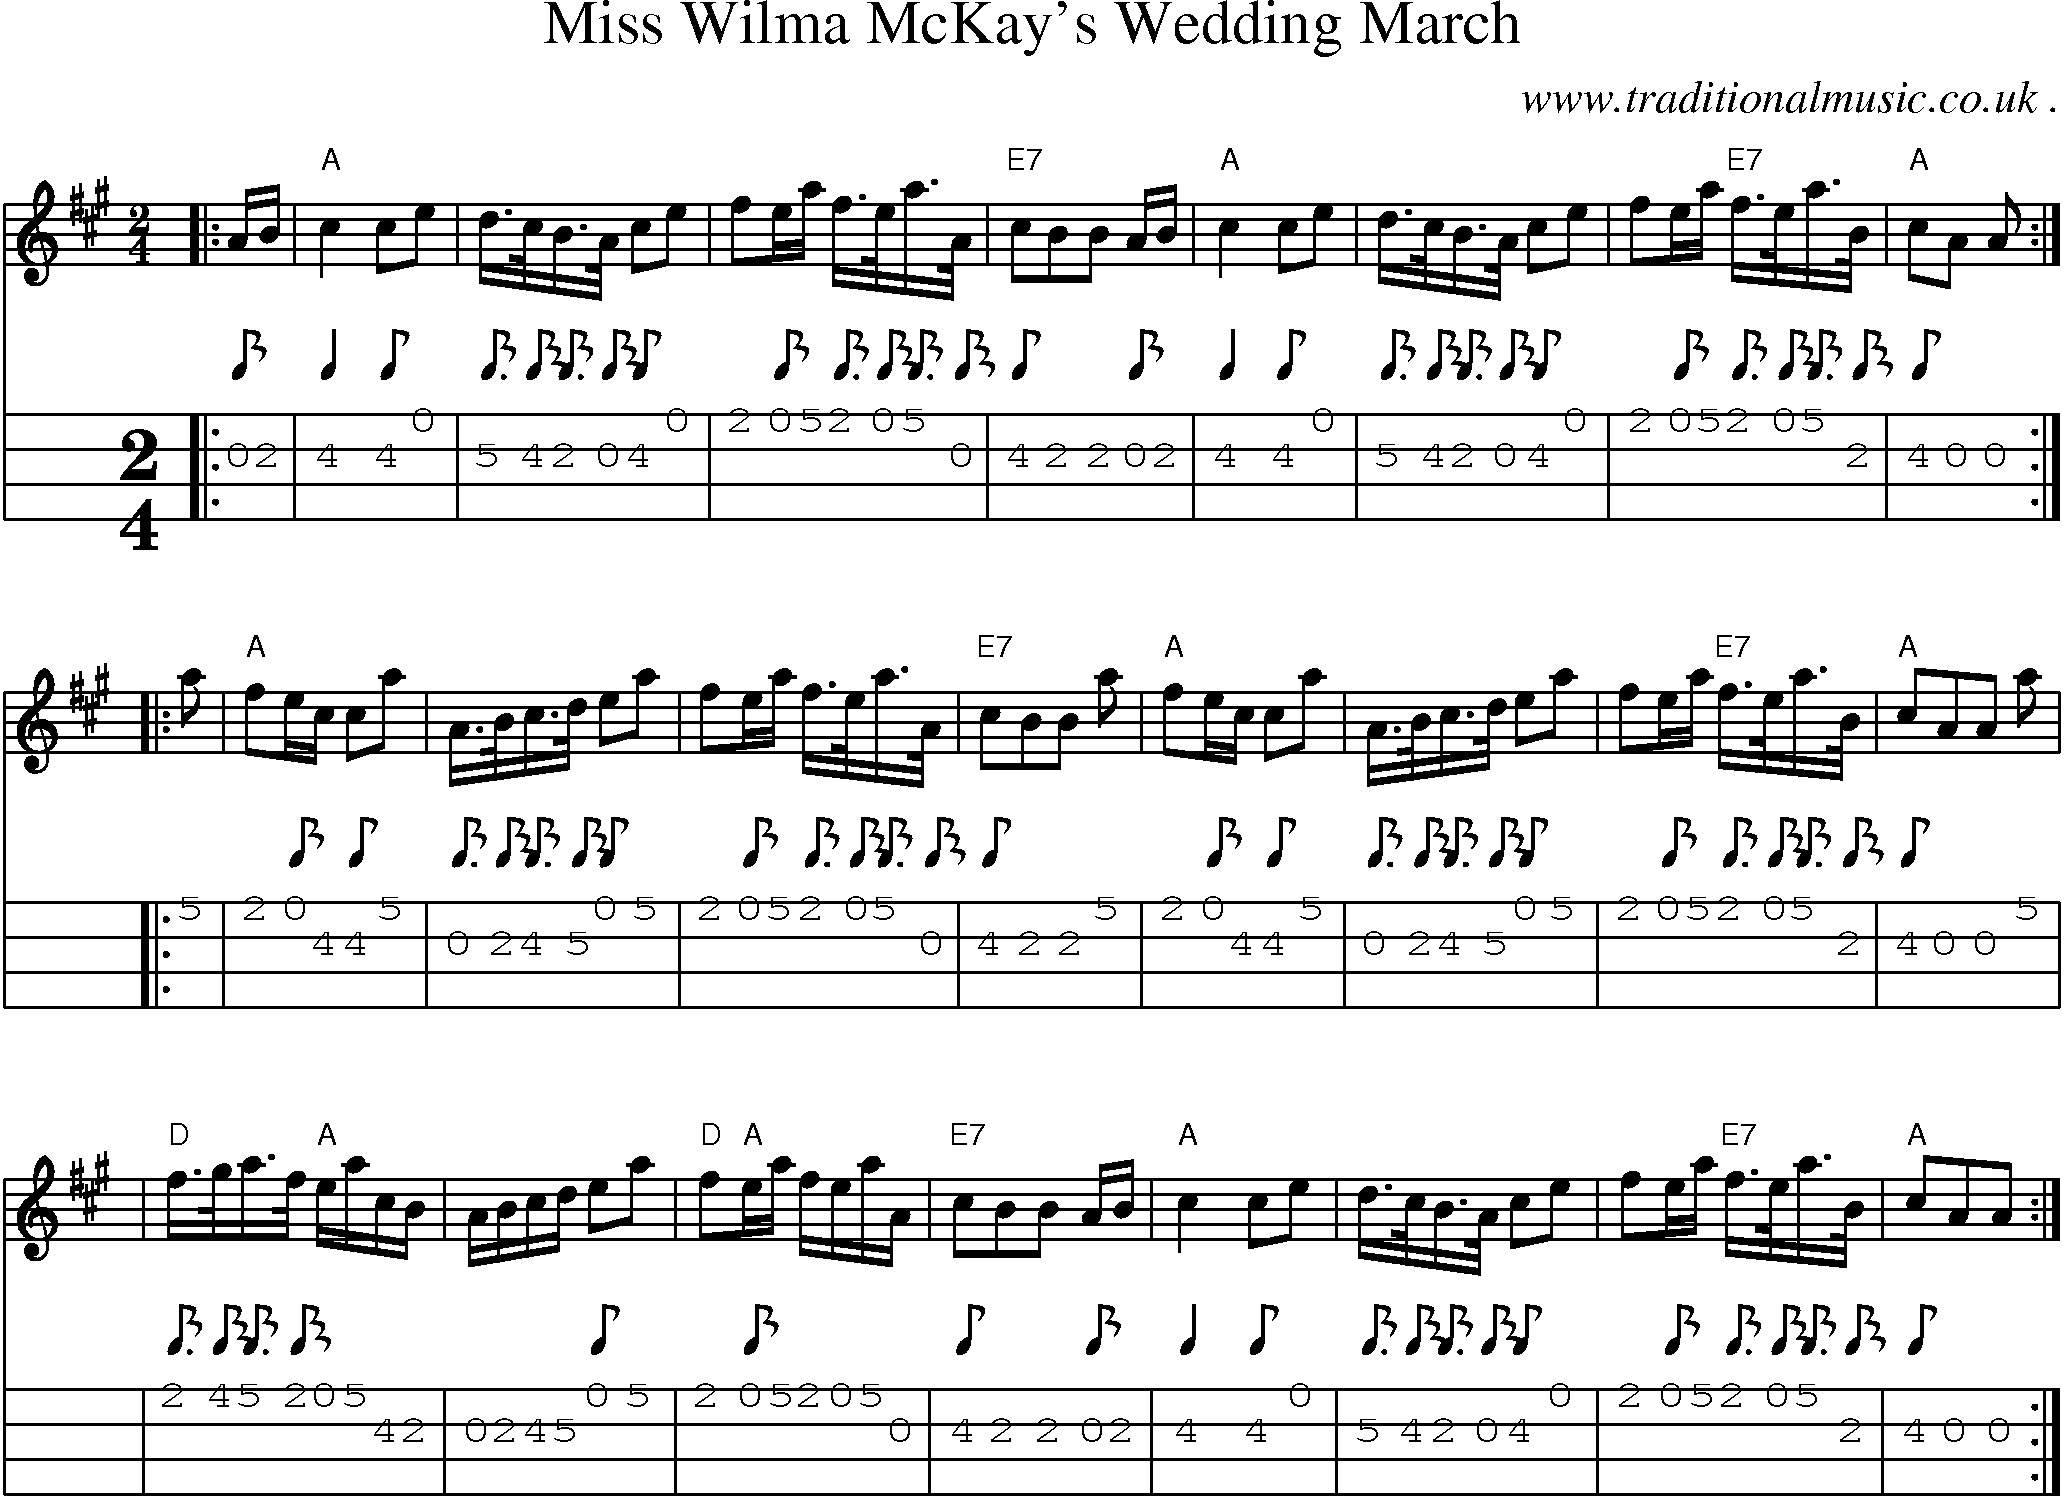 Sheet-music  score, Chords and Mandolin Tabs for Miss Wilma Mckays Wedding March